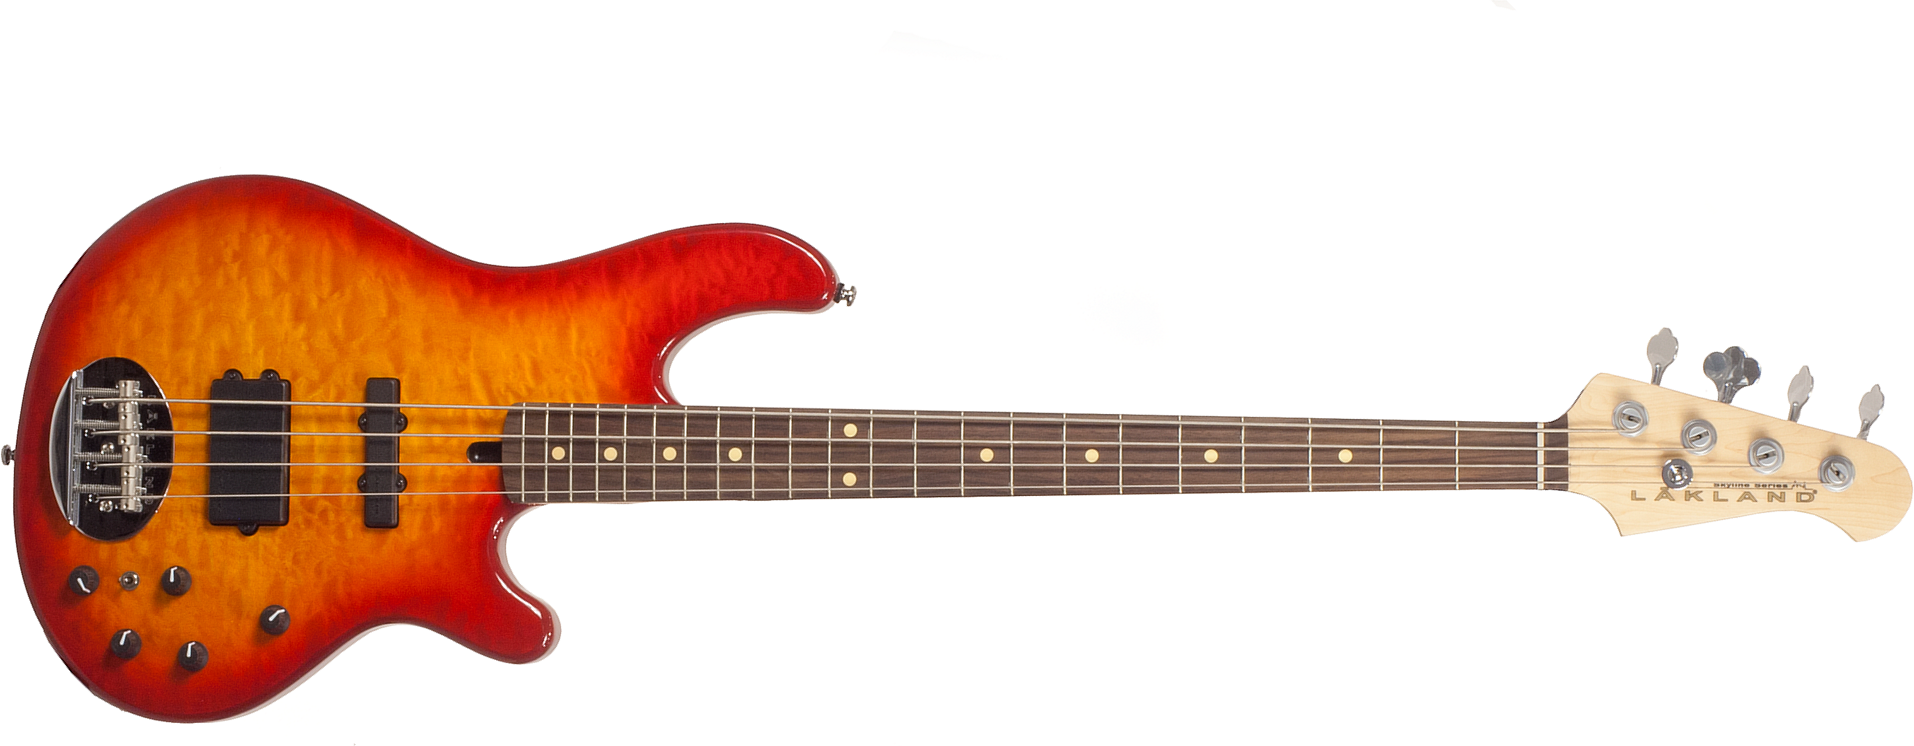 Lakland 44-02 Deluxe Skyline Rw - Cherry Sunburst - Solid body electric bass - Main picture